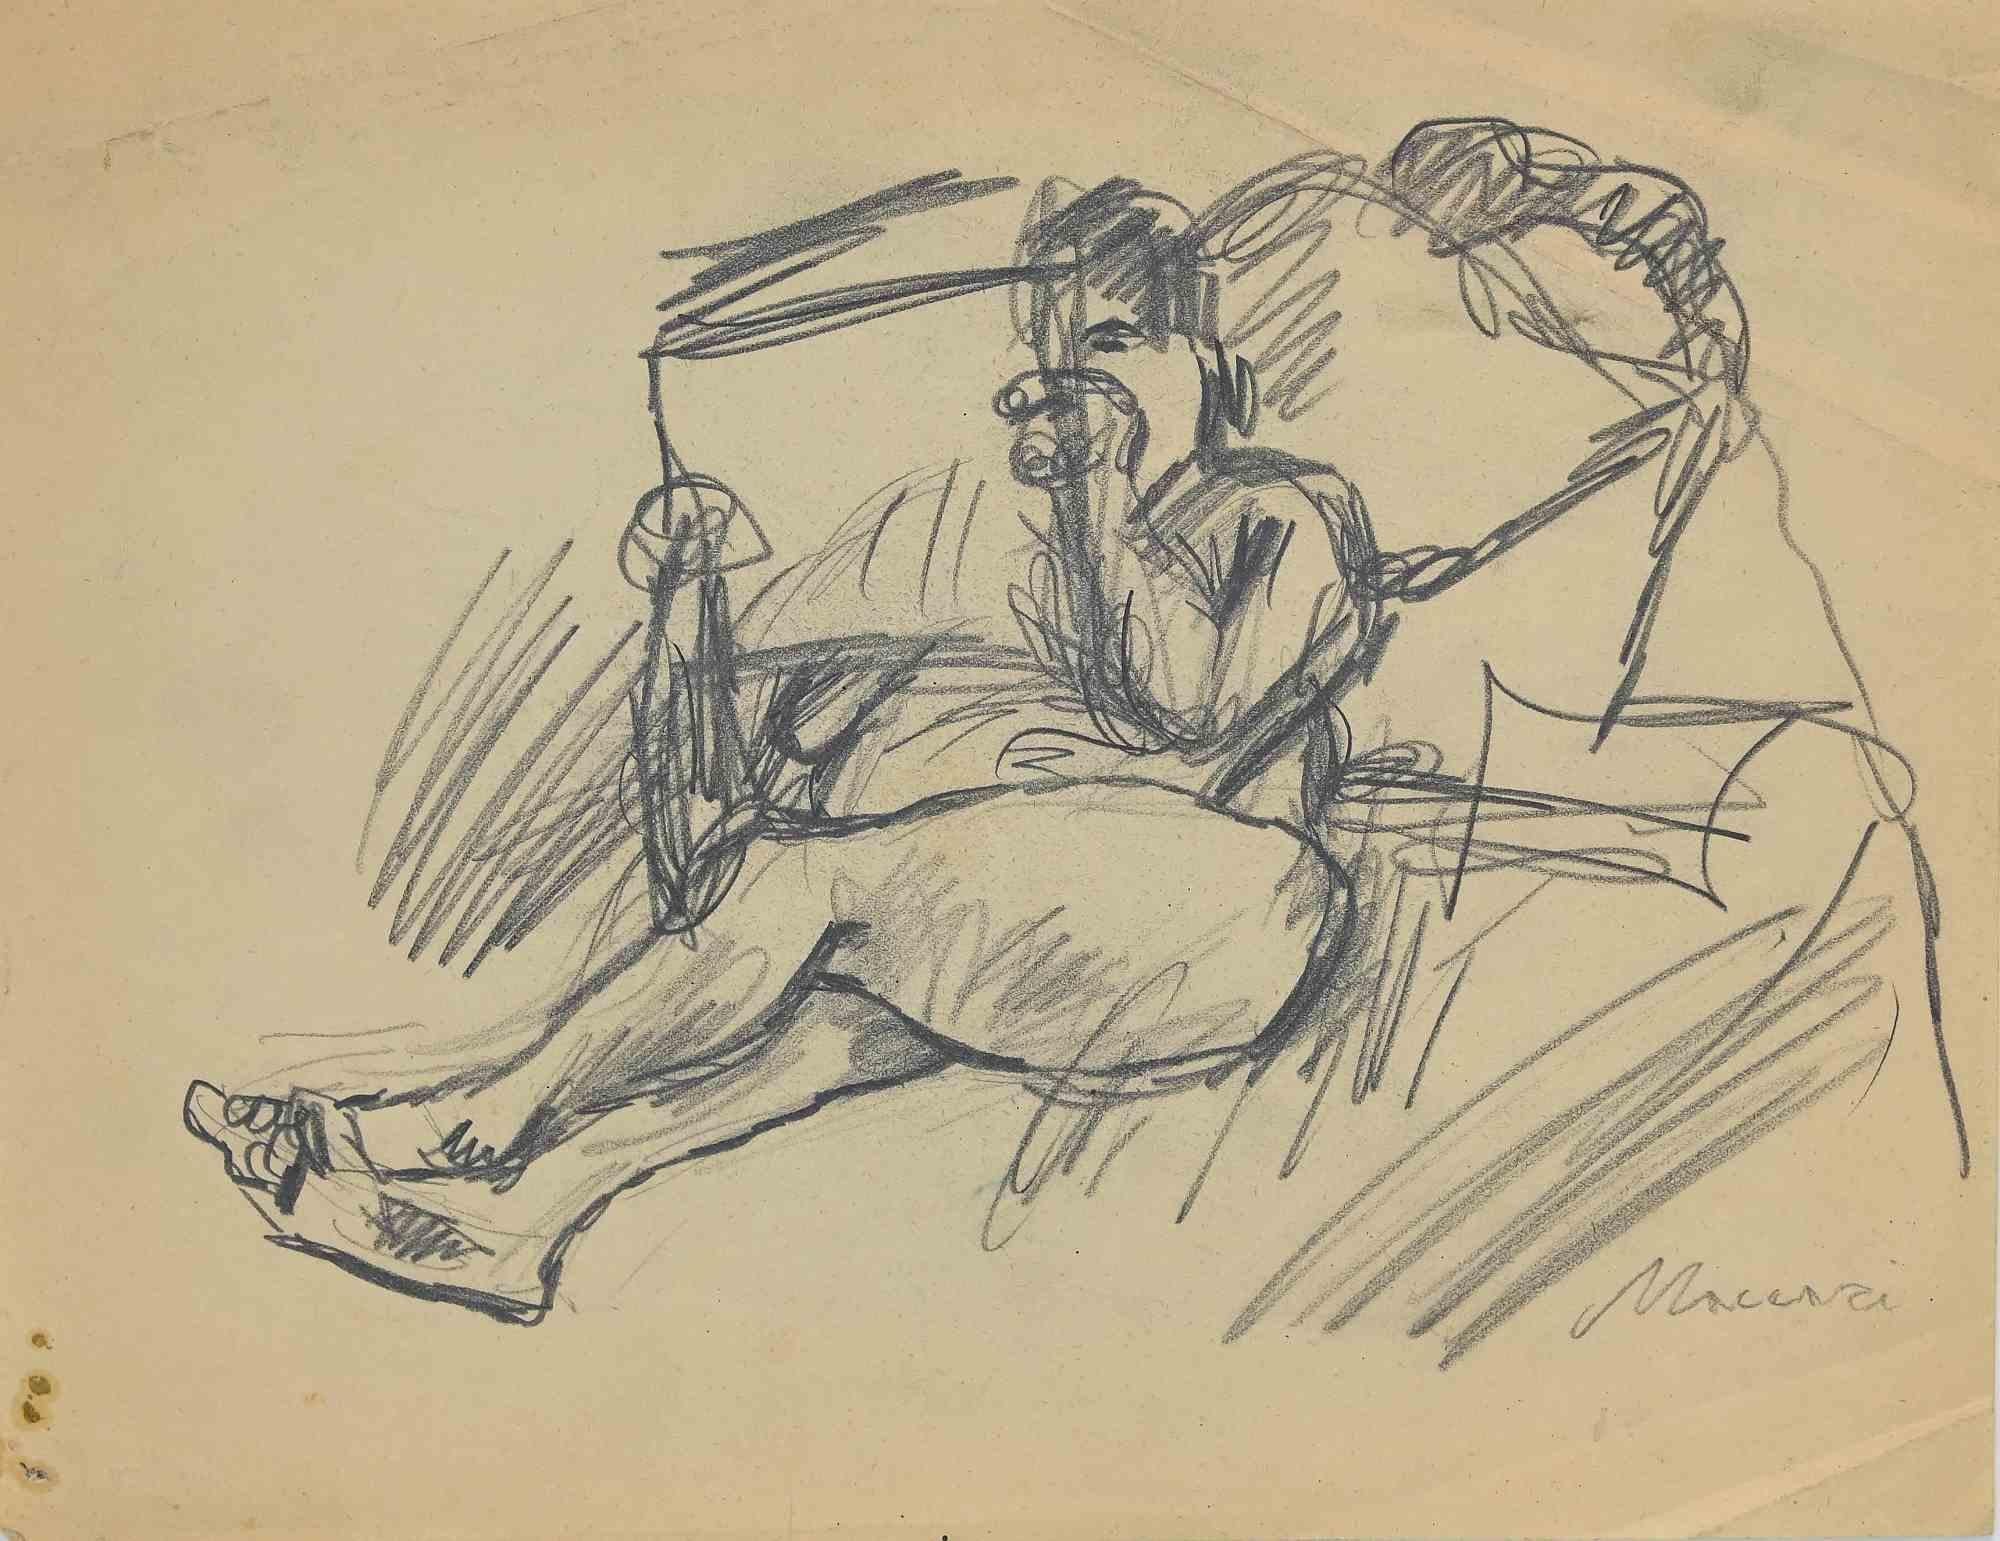 Reclined is an original Charcoal Drawing realized by Mino Maccari in mid-20th Century.

Good condition on a cream colored paper.

Hand-signed by the artist with pencil.

Mino Maccari (1898-1989) was an Italian writer, painter, engraver and